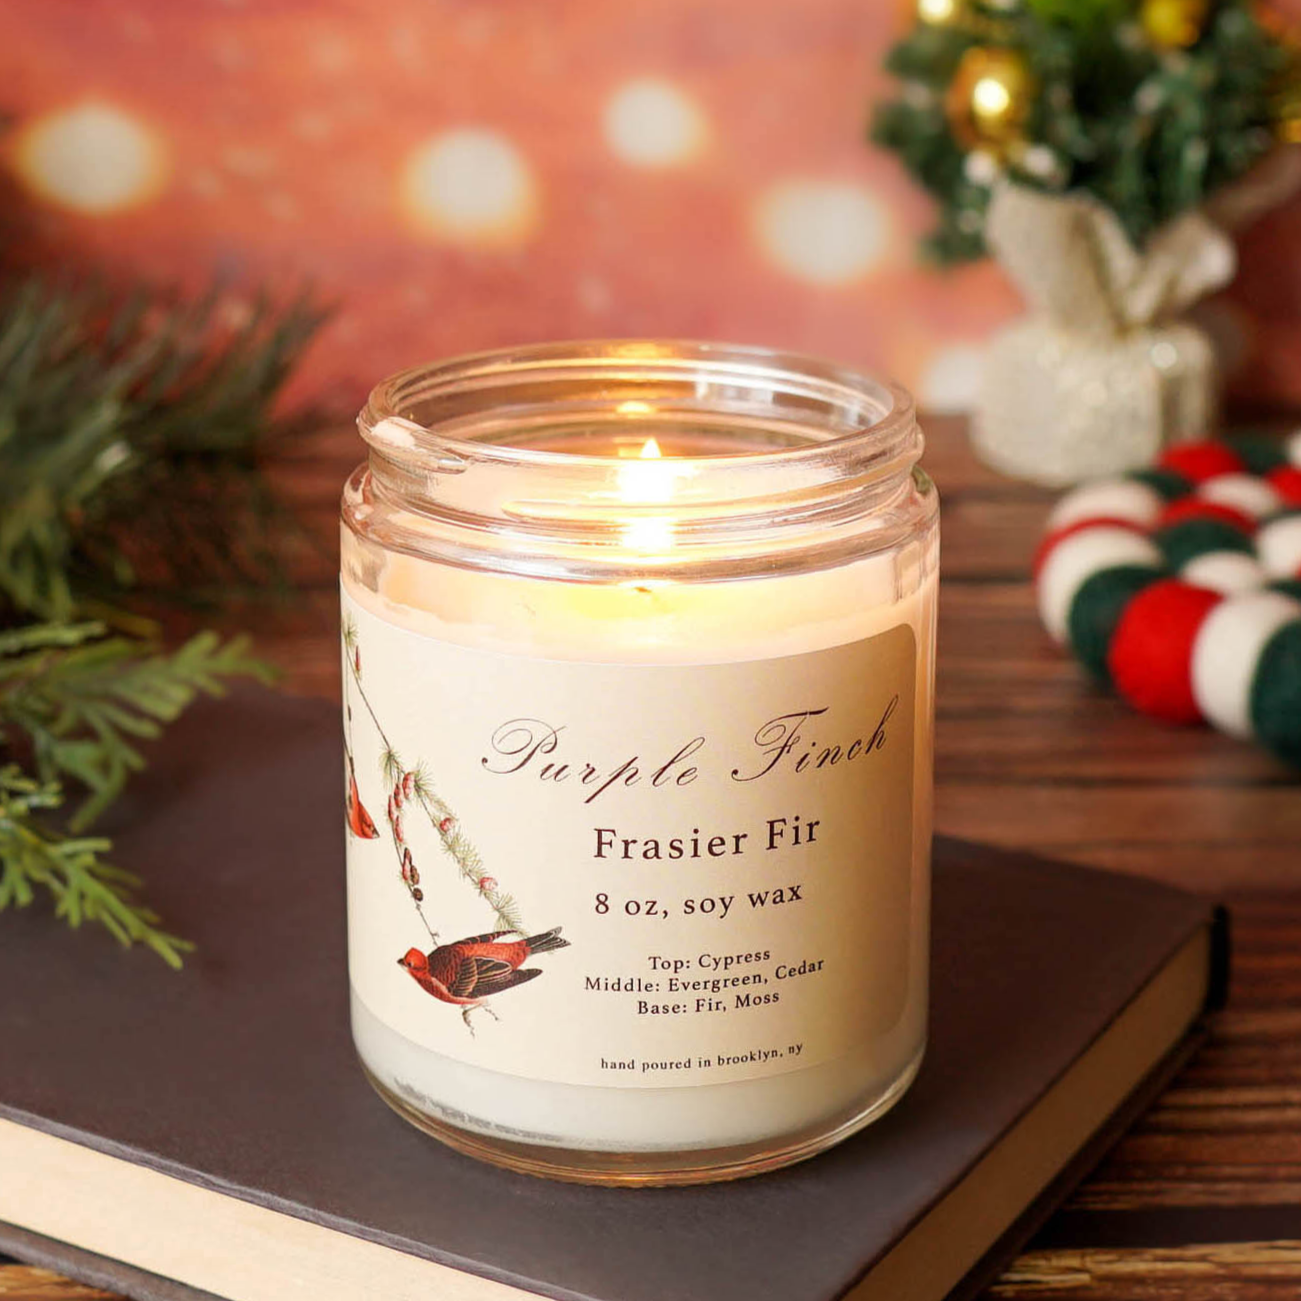 Purple Finch: Fraser Fir Scented Candle